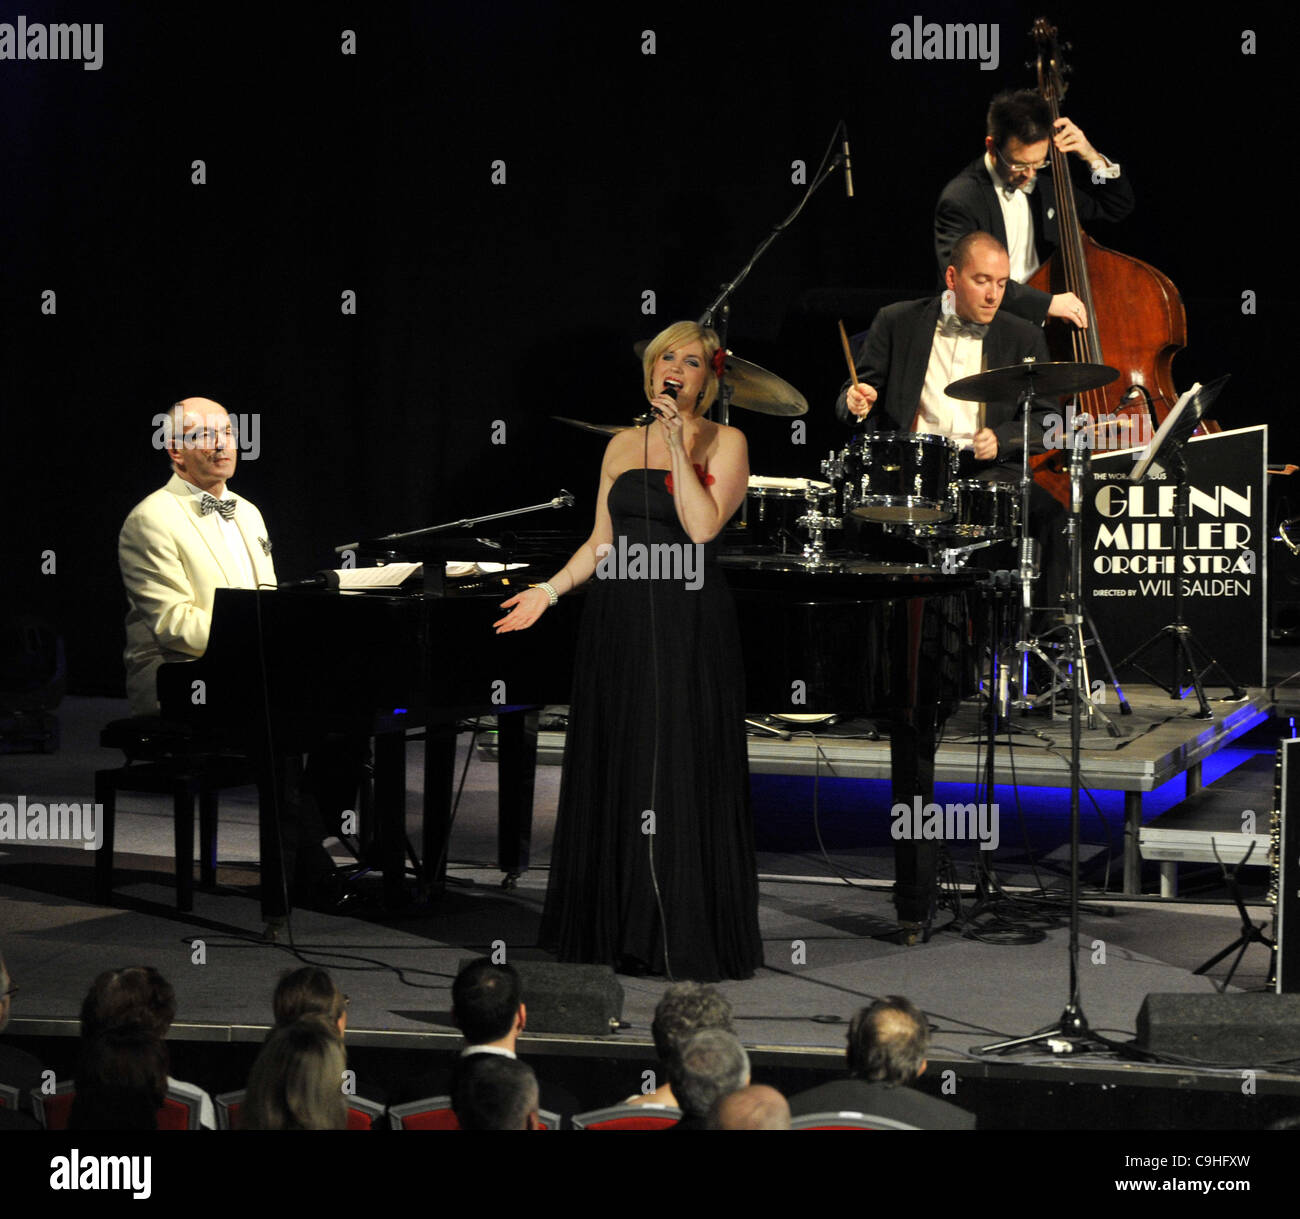 Singer Julia Rich and pianist Theron Brown perform during the concert of American Glenn Miller Orchestra in Plzen (Pilsen), Czech Republic, on Thursday, January 5, 2011. (CTK Photo/Petr Eret) Stock Photo